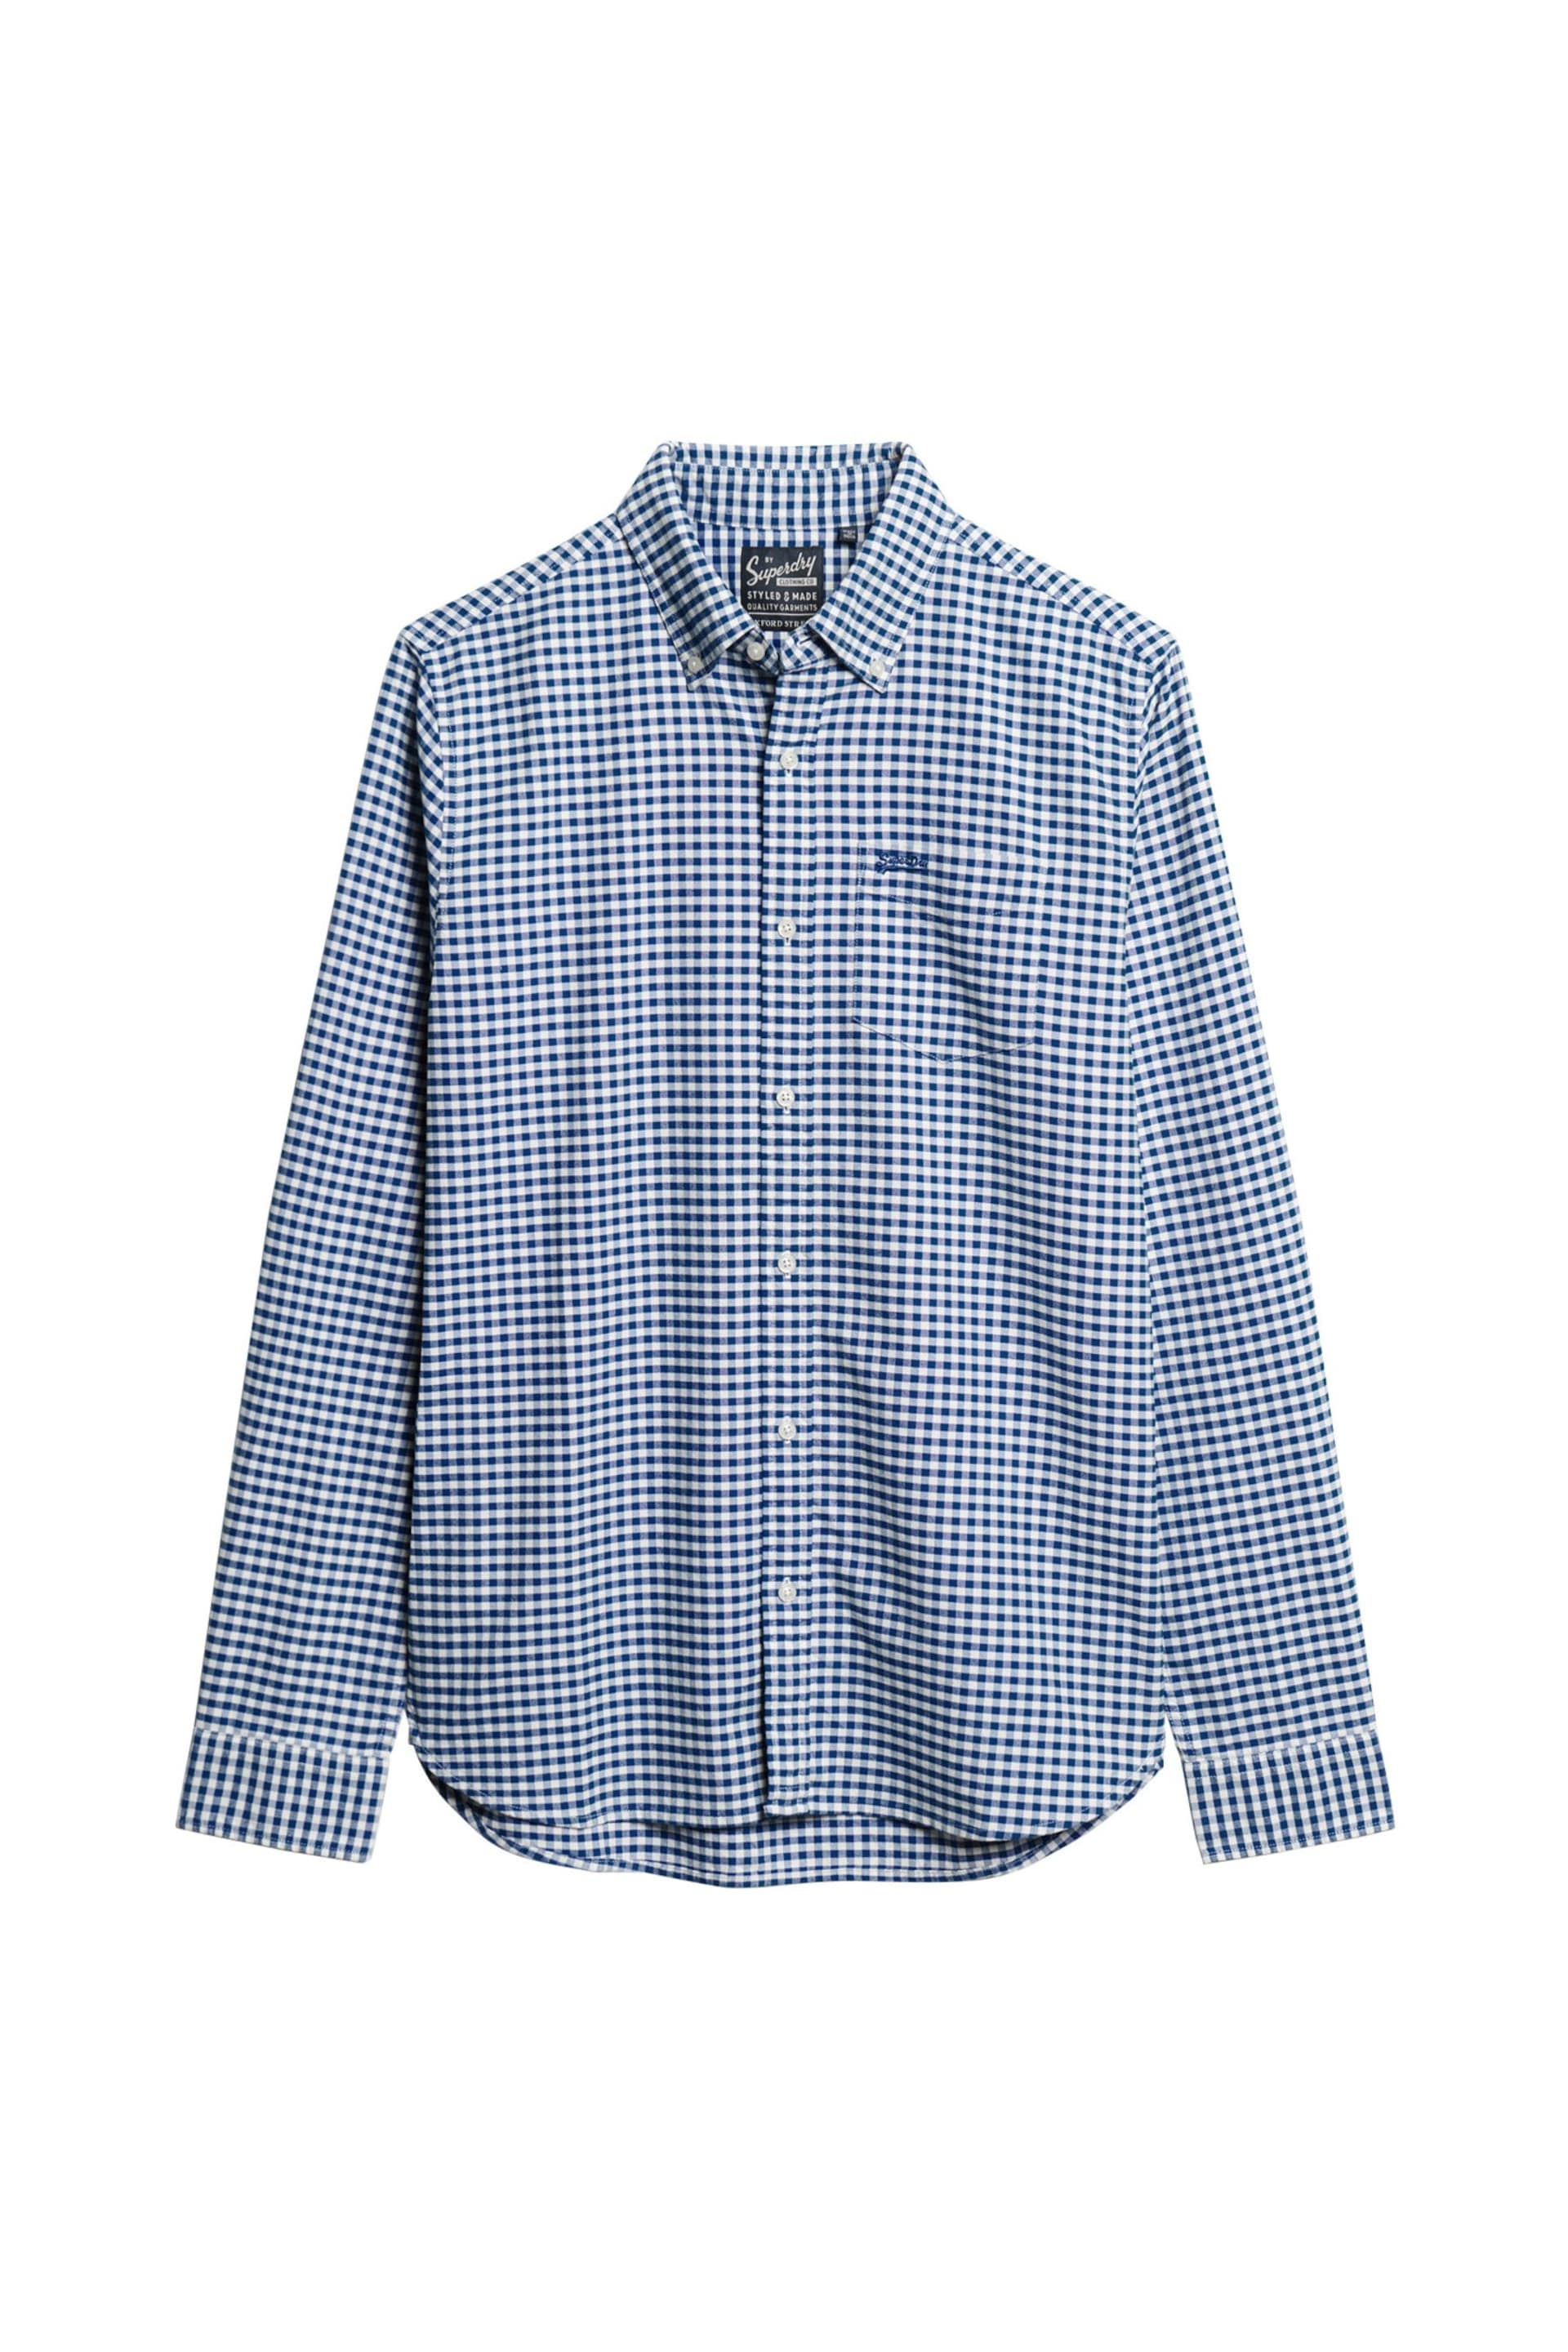 Superdry Blue/Black Cotton Long Sleeved Oxford Shirt - Image 4 of 6